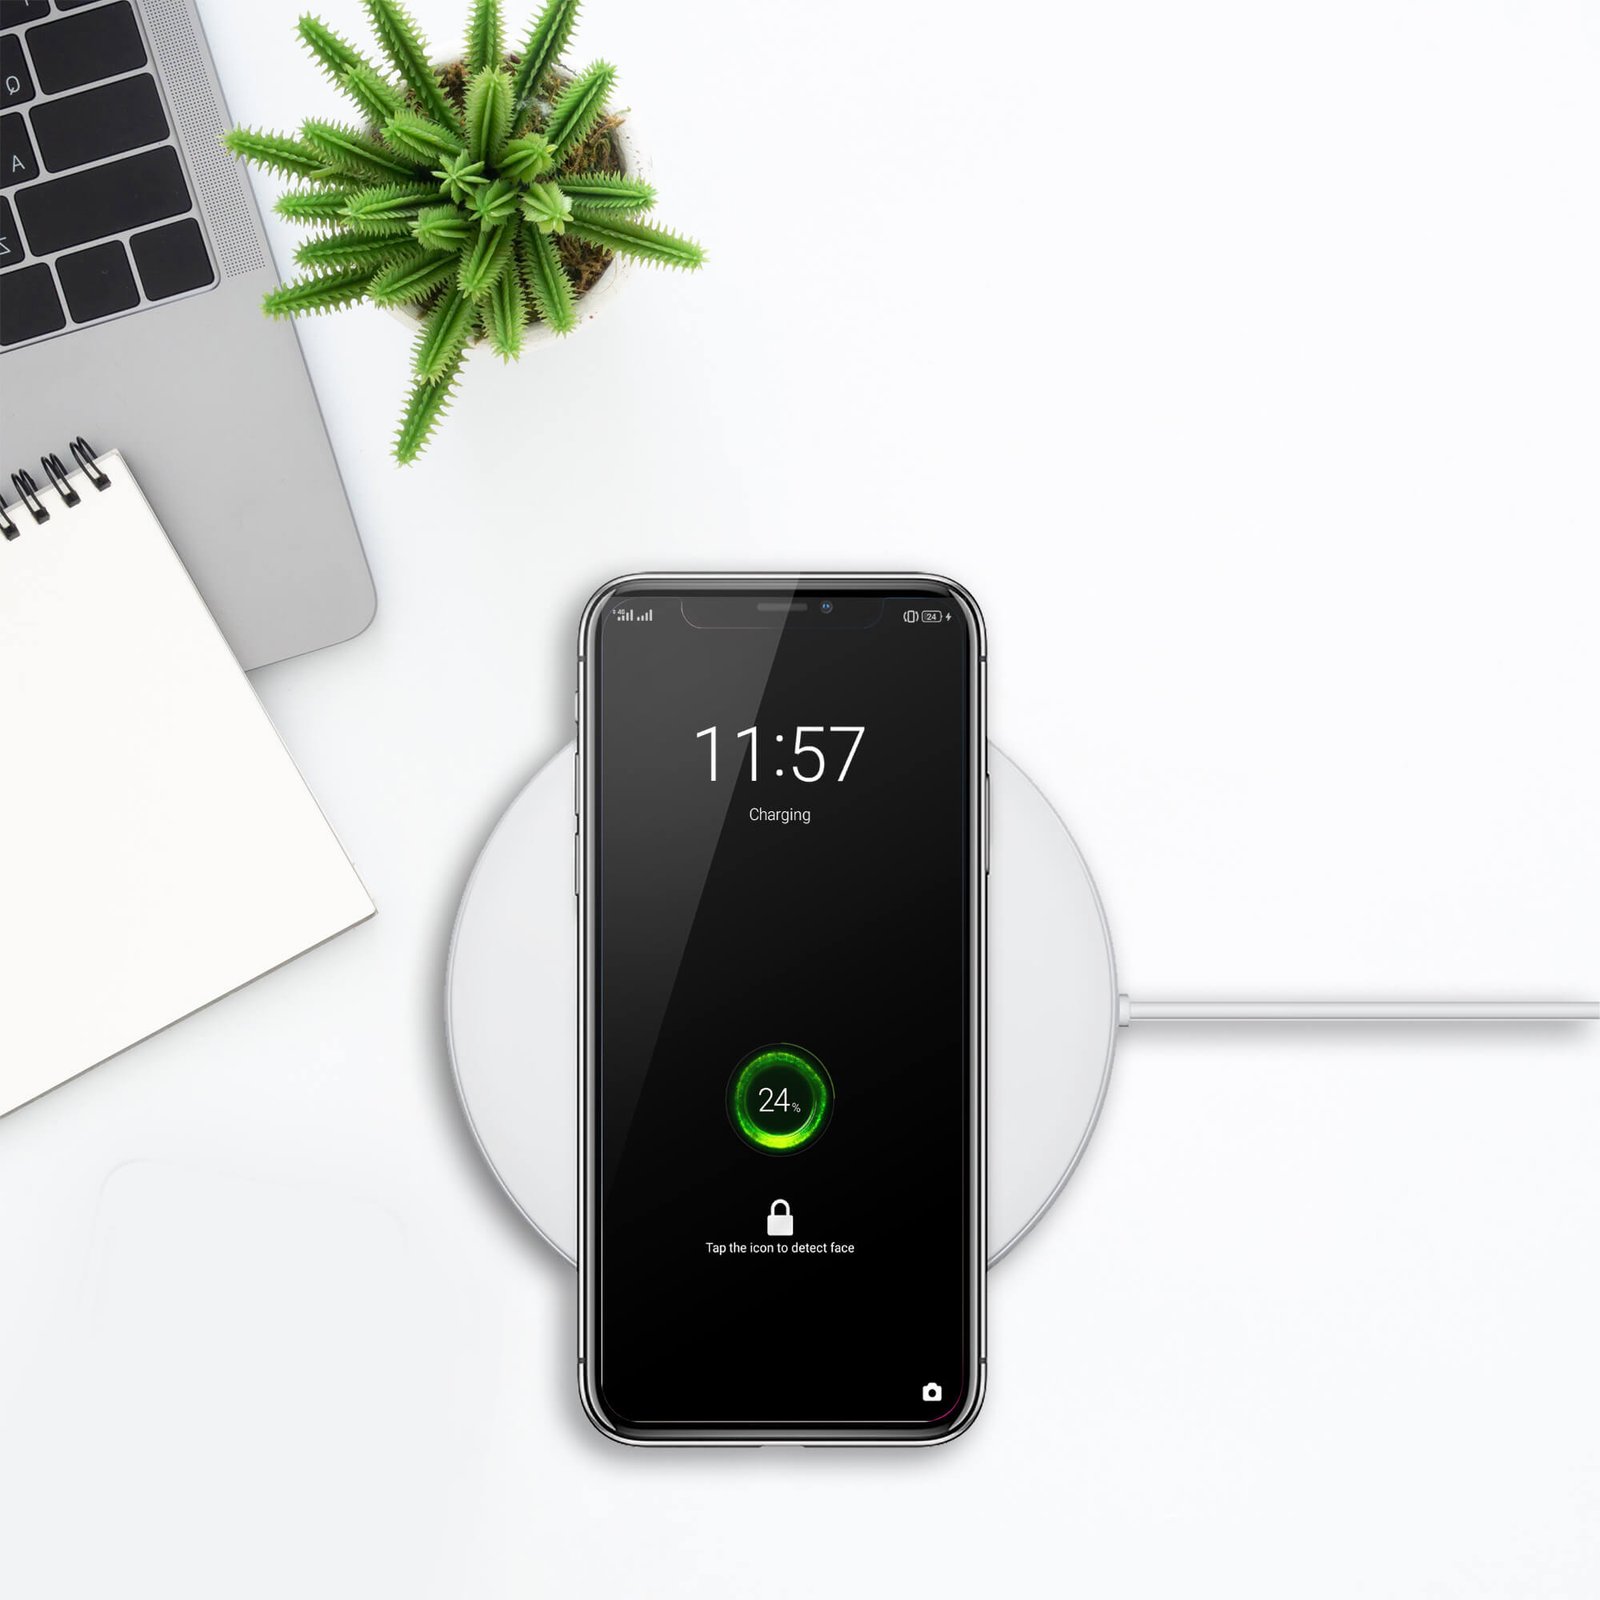 Free Wireless Charger Mockup PSD Template